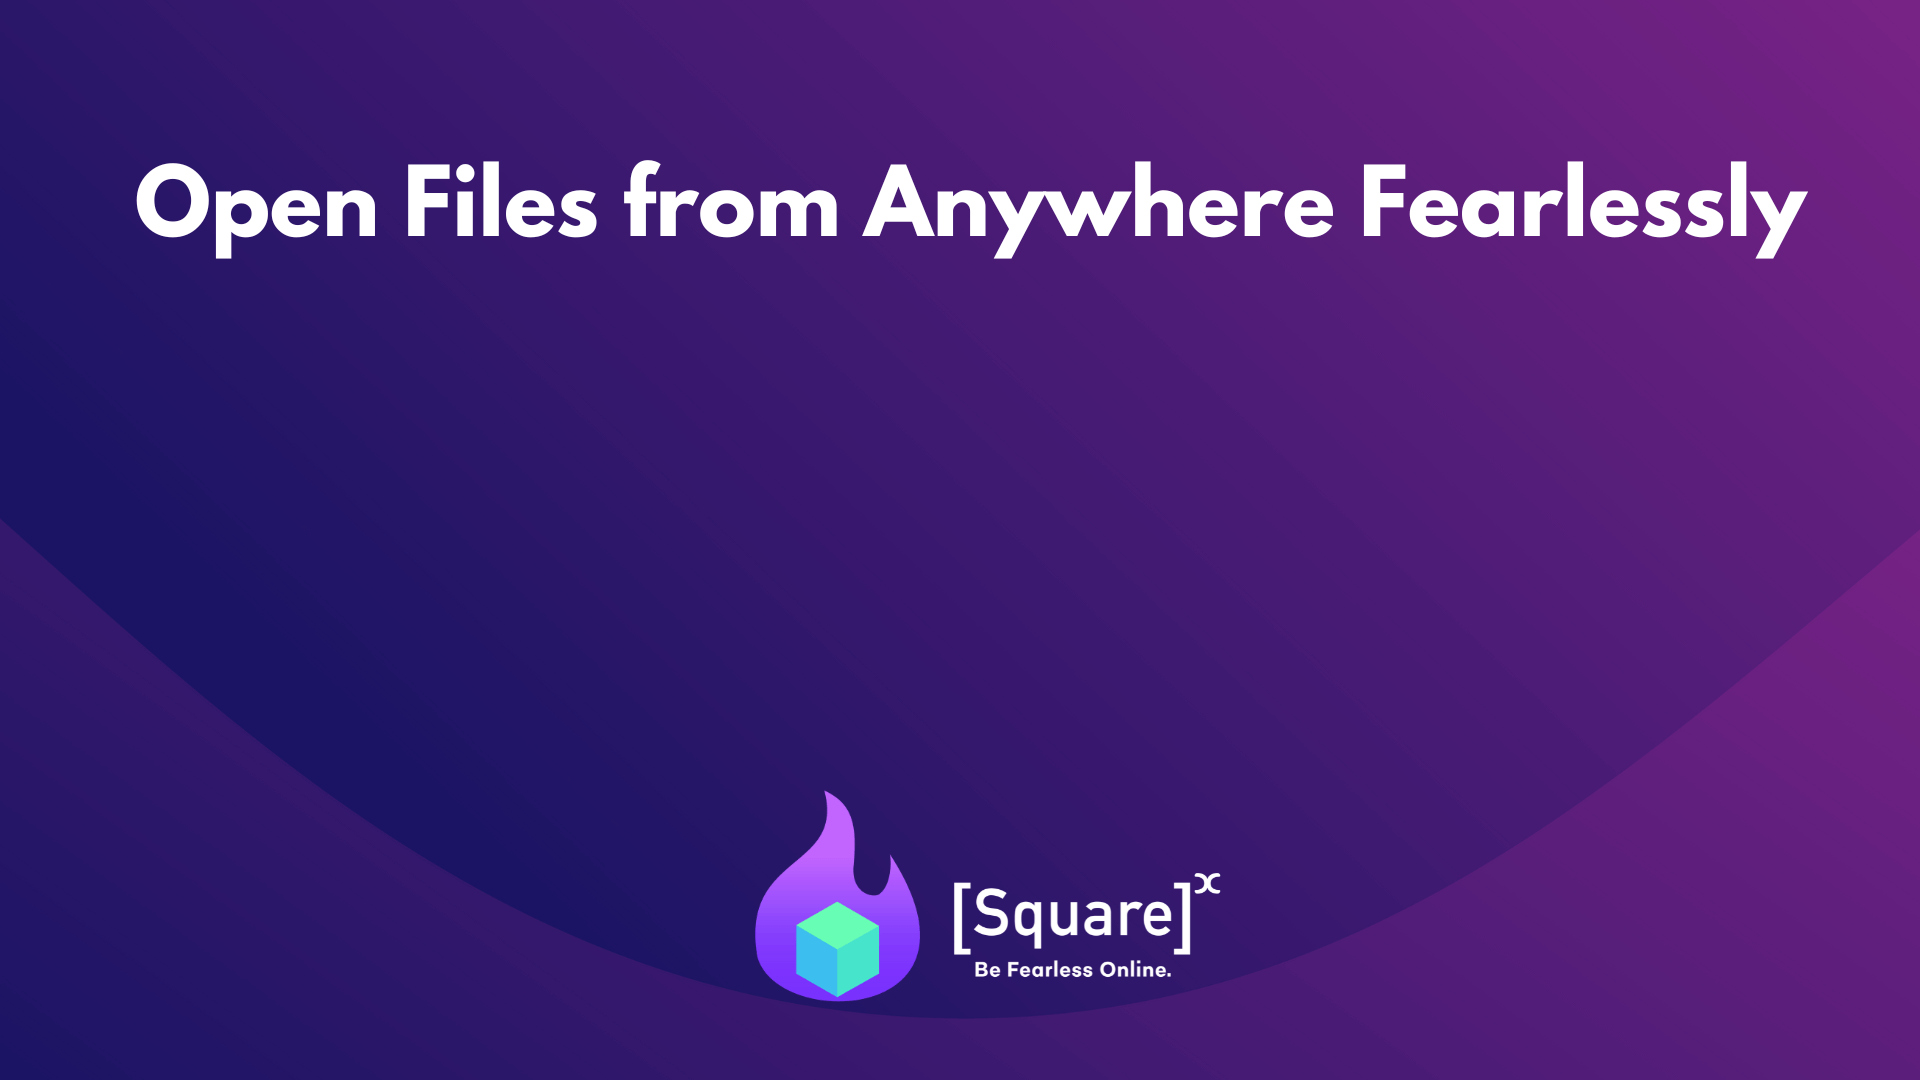 Open files from anywhere fearlessly